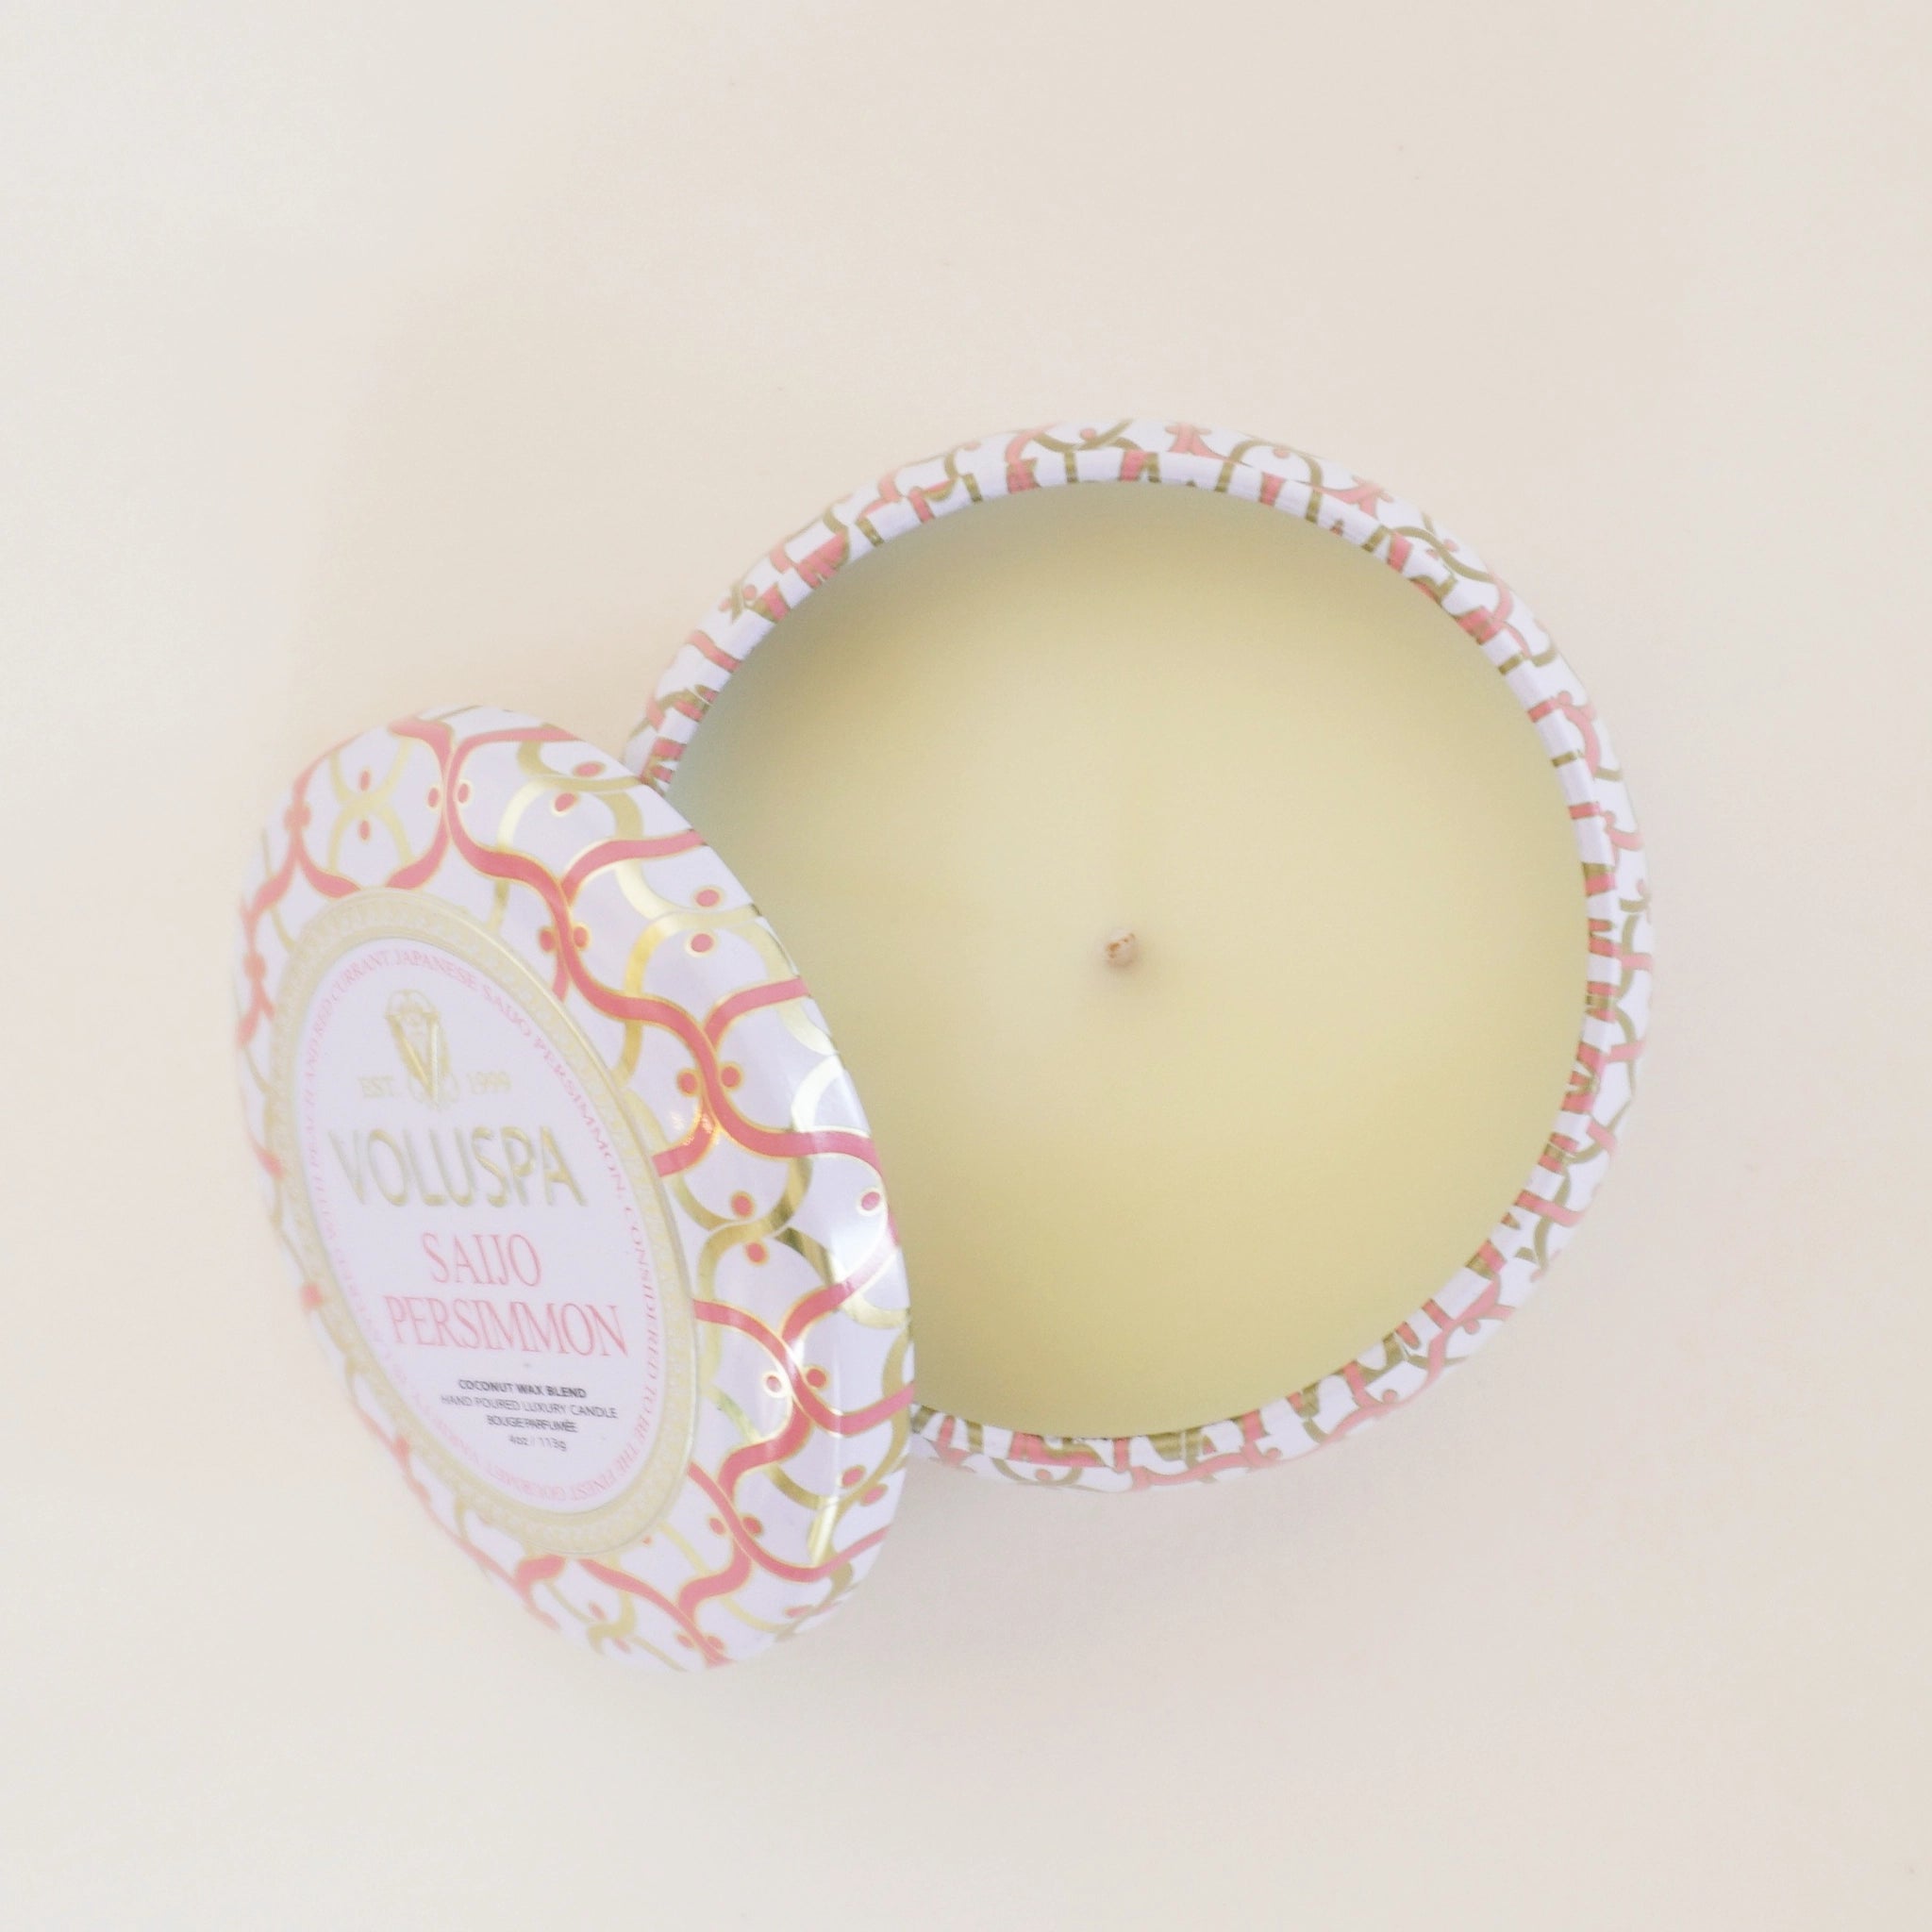 Birds eye view of a round tin candle. Inside is a white candle with a white wick in the center. The lid is leaning against the left side of the candle. The lid is whtie with pink and gold swirly lines. There is a white circle in the middle with gold text that reads ‘voluspa.’